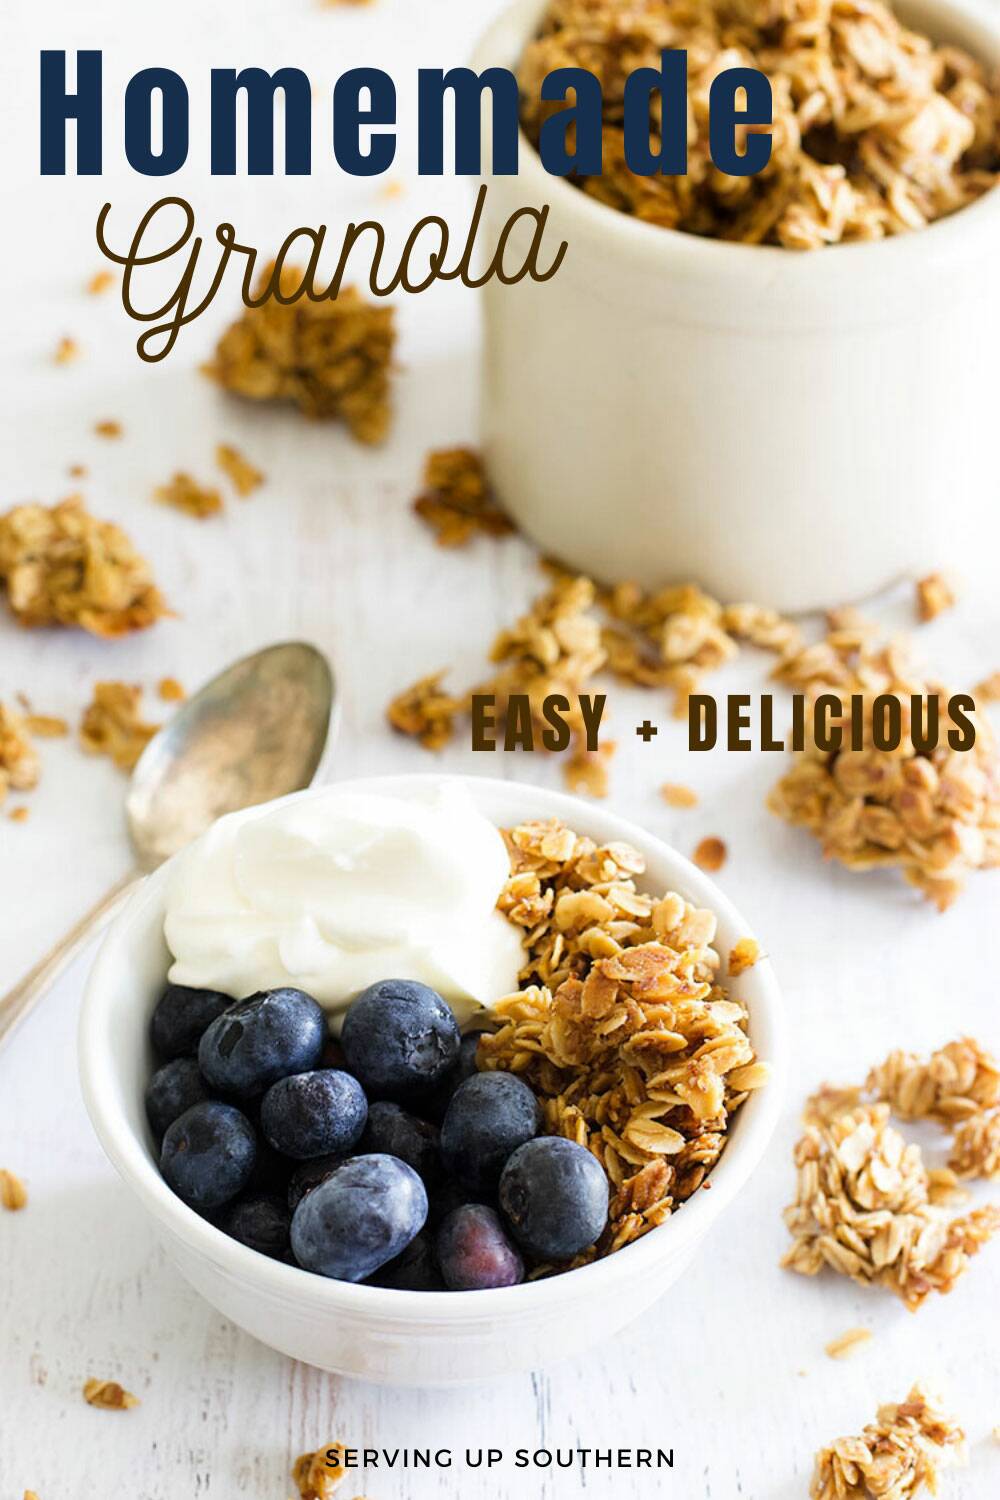 Pinterest graphic of a bowl of homemade granola with geek yogurt and blueberries in a white bowl with a spoon.